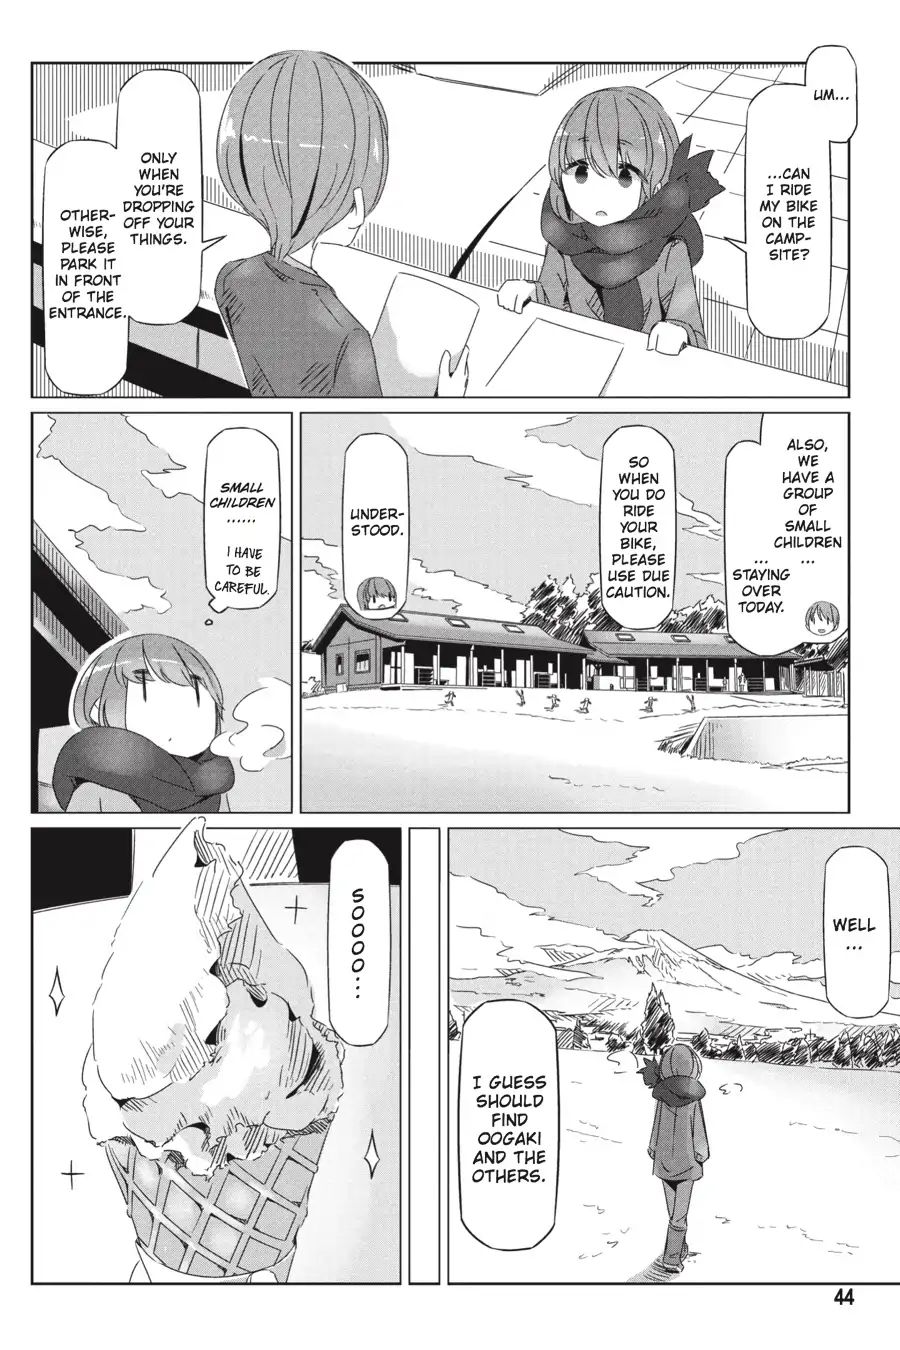 Yurucamp Vol.4 Chapter 20: The Impatient Camper and the Outdoor Snacks